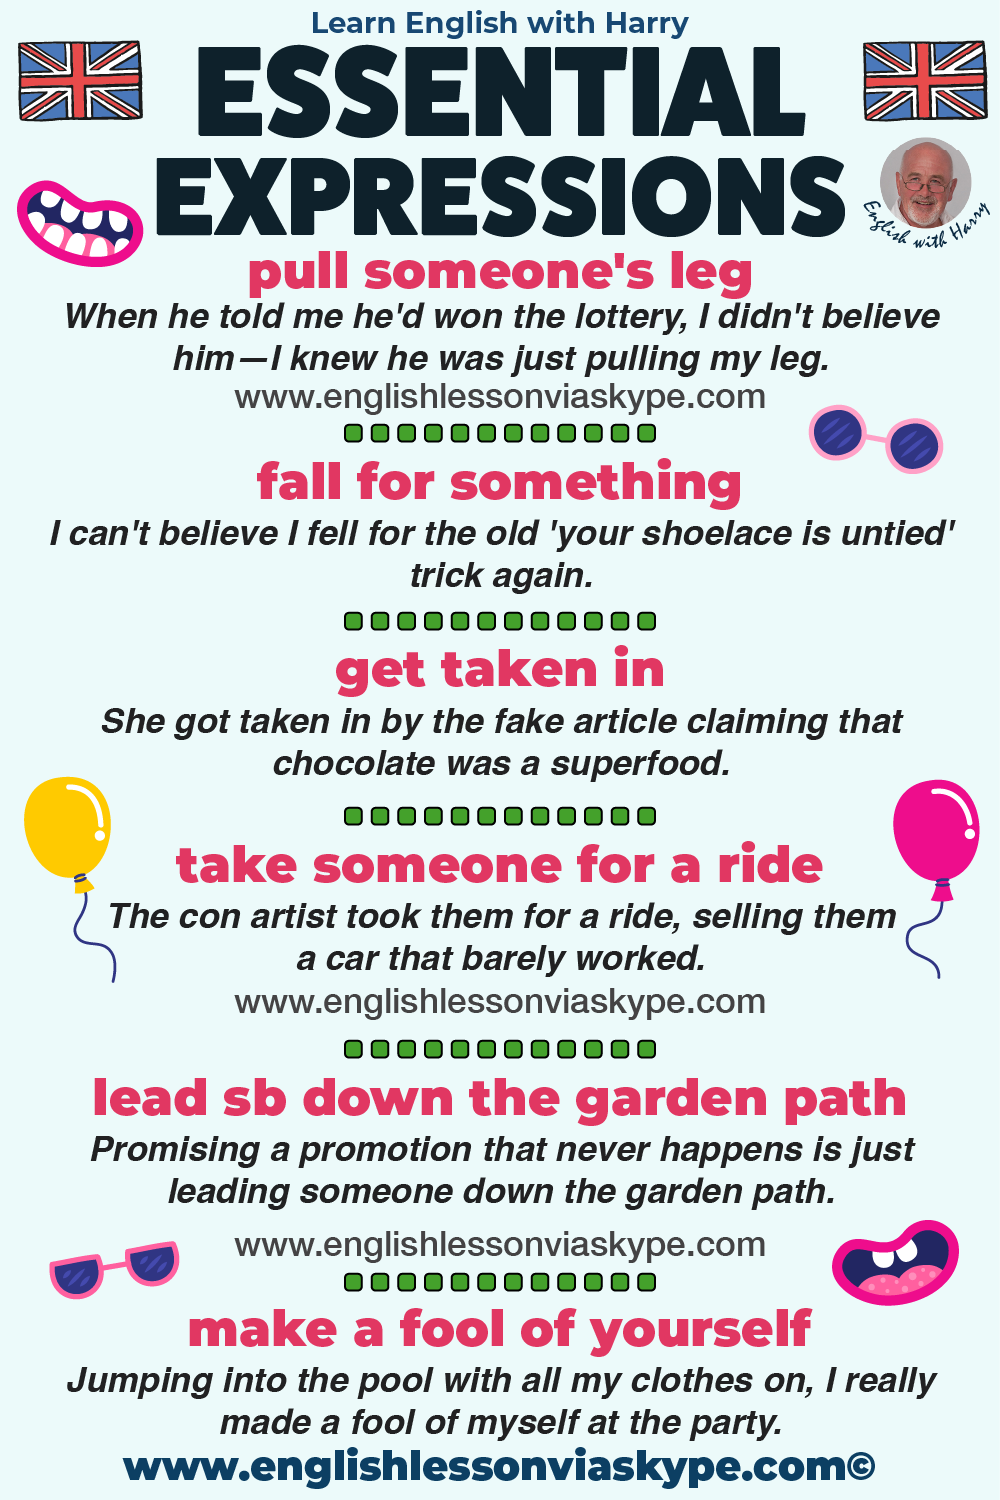 April Fools' Day essential English vocabulary. English speaking skills. Improve English speaking skills. Upgrade your vocabulary. English grammar rules. Improve English speaking. Advanced English lessons on Zoom and Skype. Improve English speaking and writing skills. #learnenglish